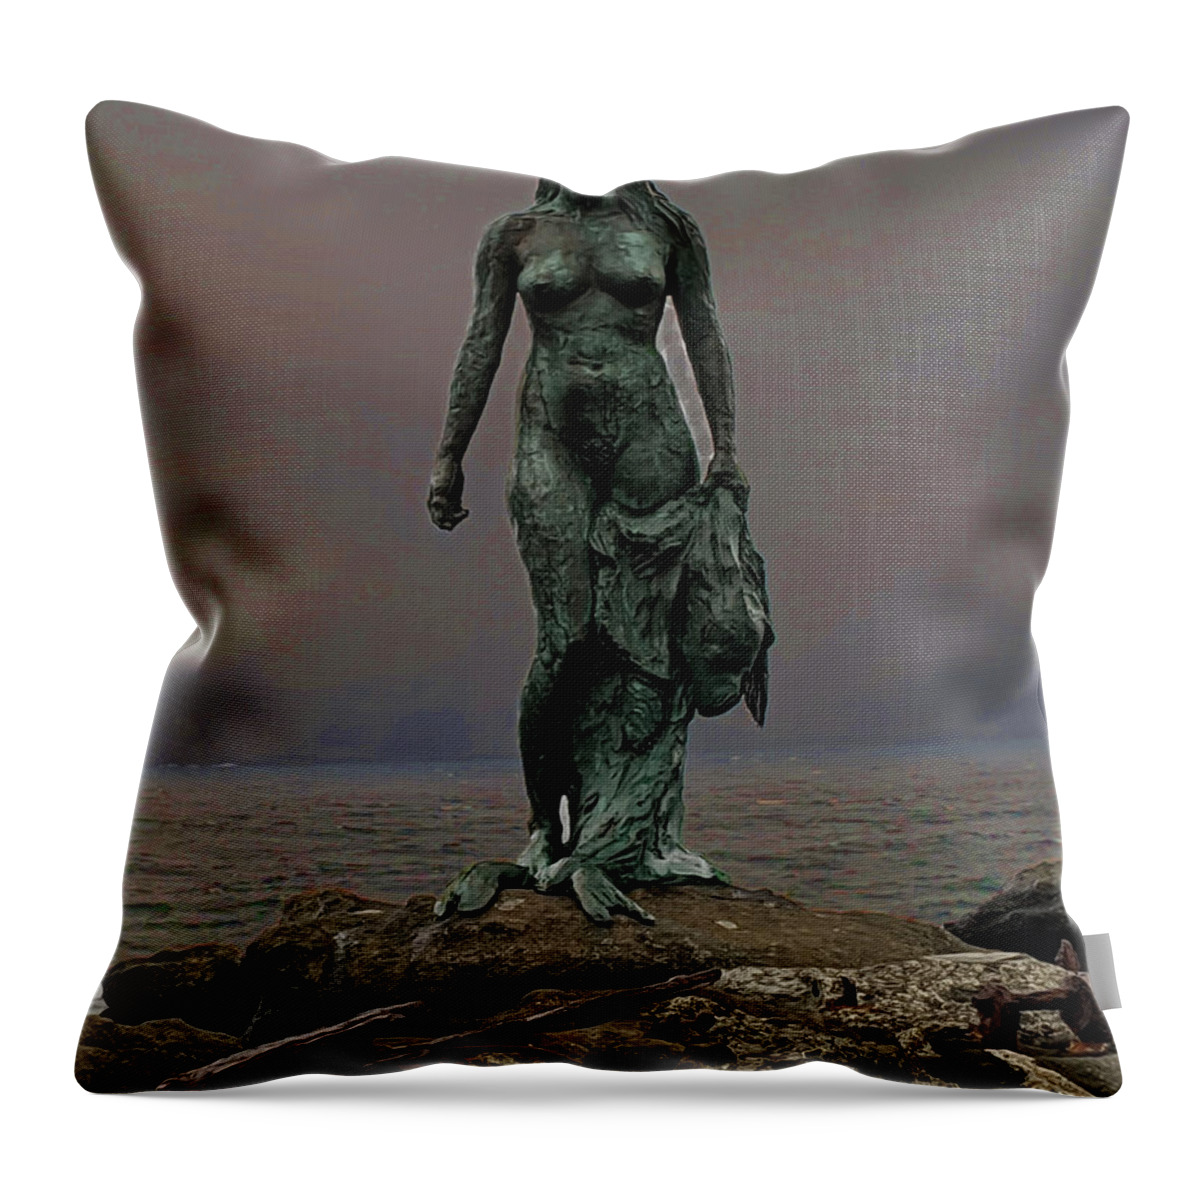 Statue Throw Pillow featuring the photograph Seal Woman Statue by Imagery-at- Work